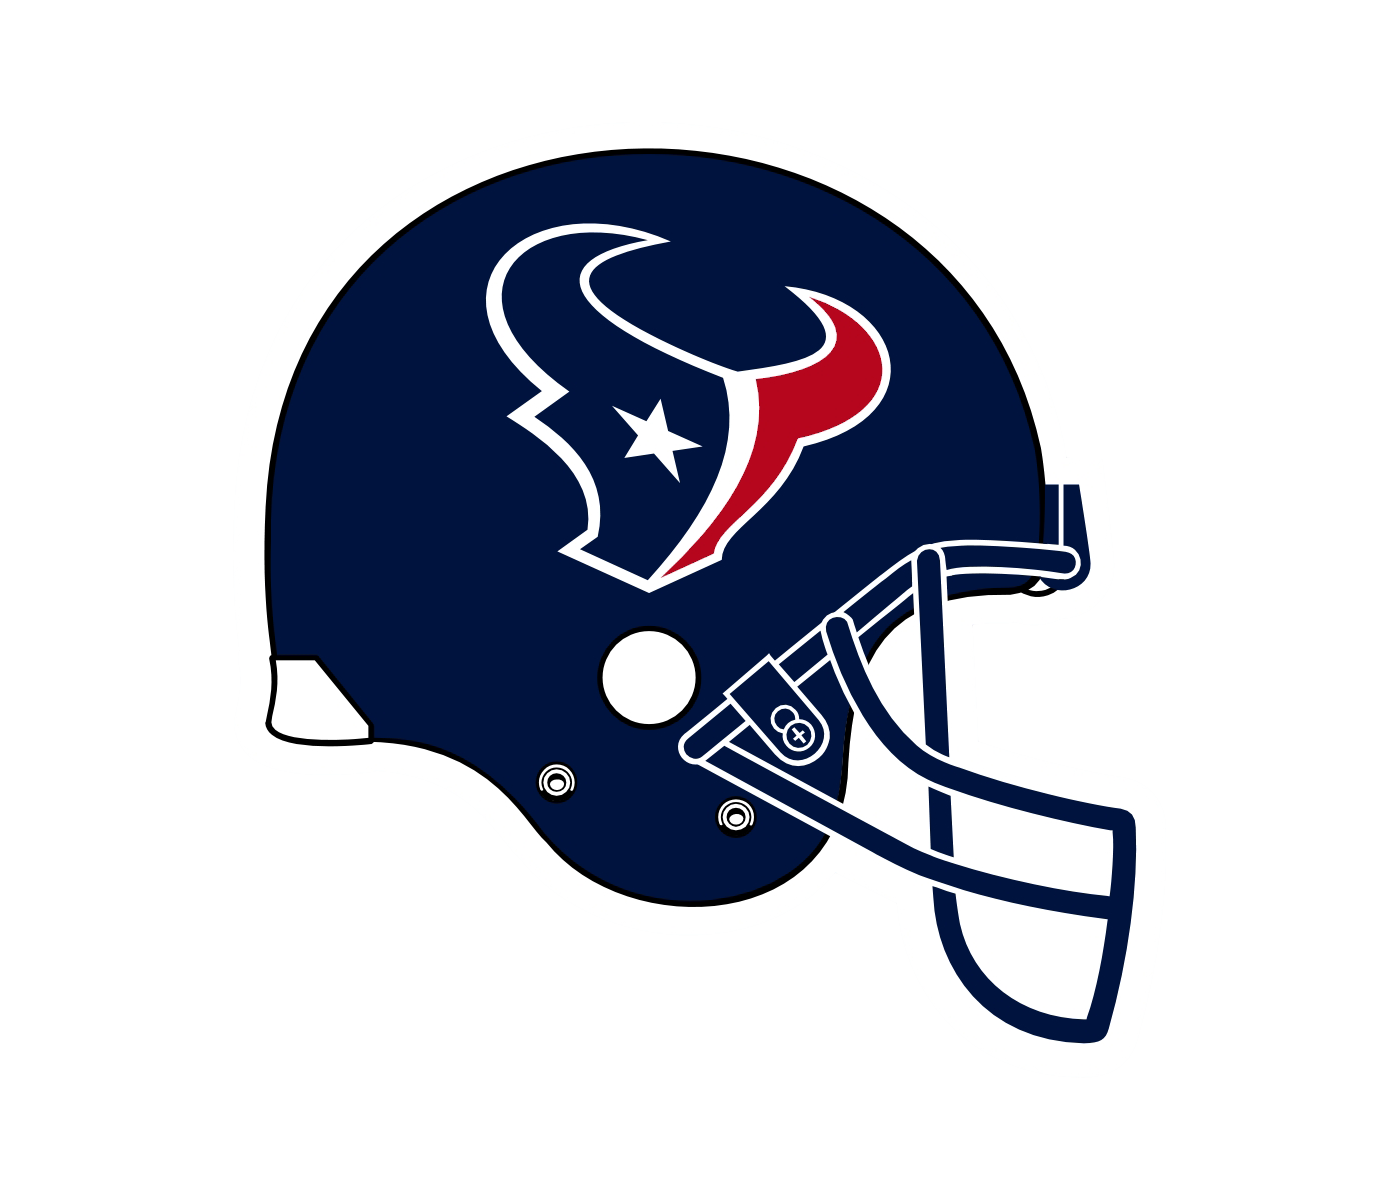 Houston Texans PNG High Quality Image